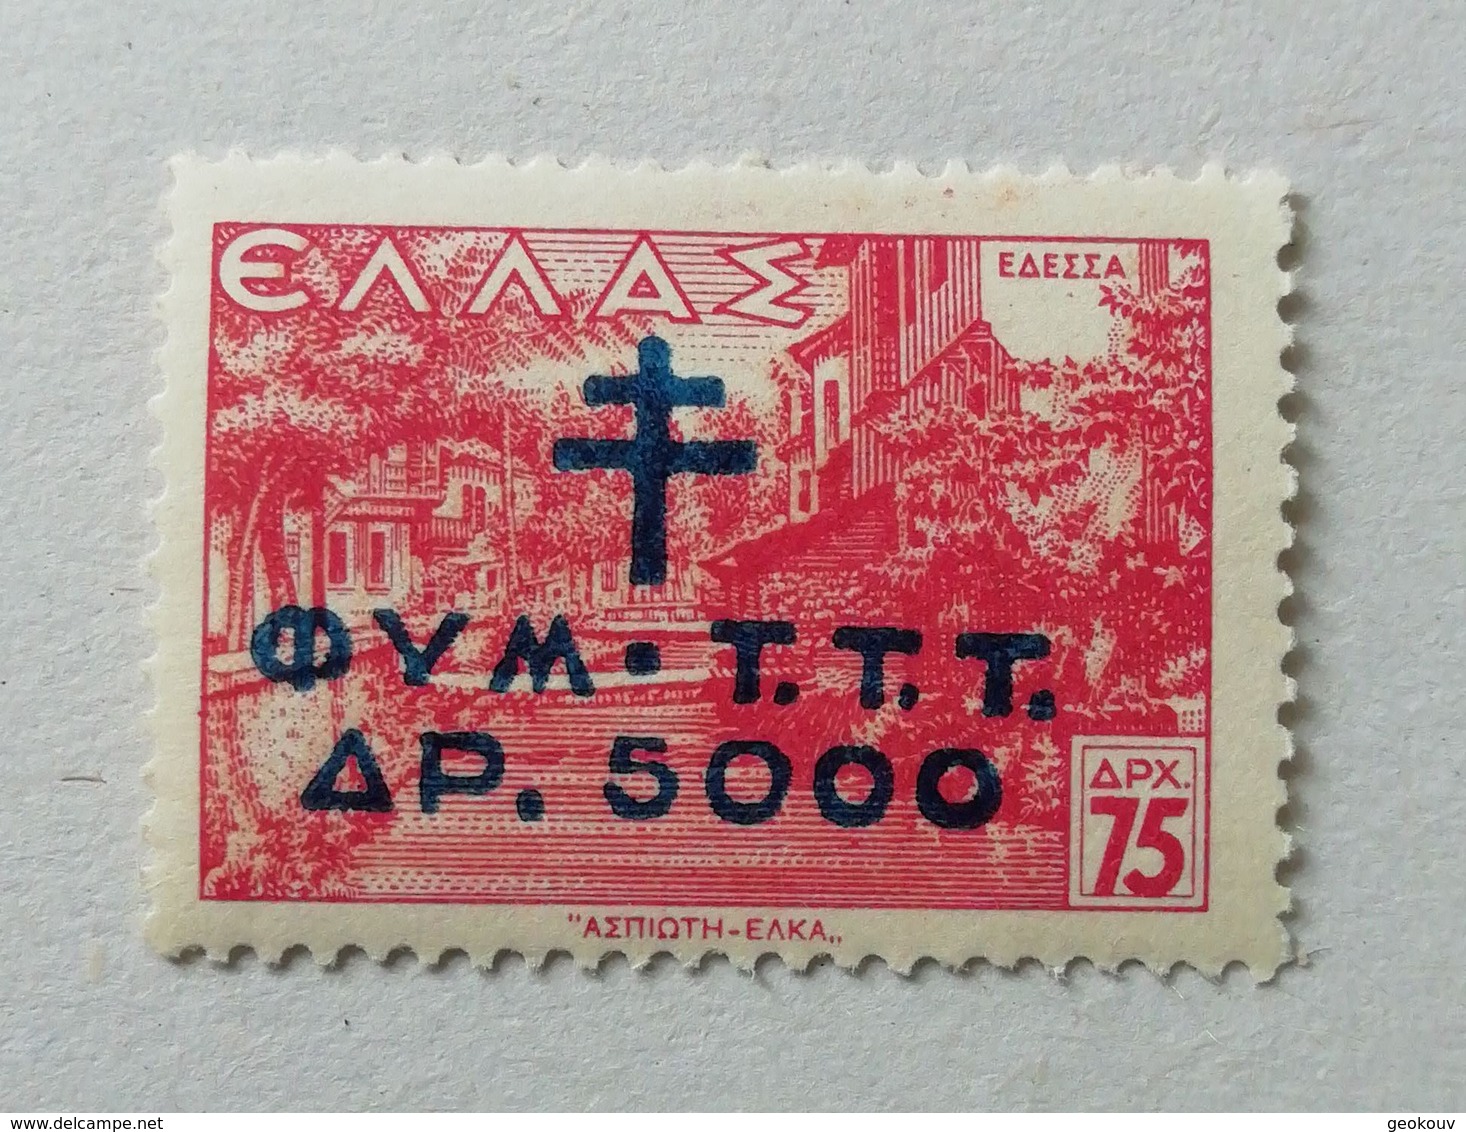 GREECE 1944 MH* CHARITY OVERPRINT - Charity Issues